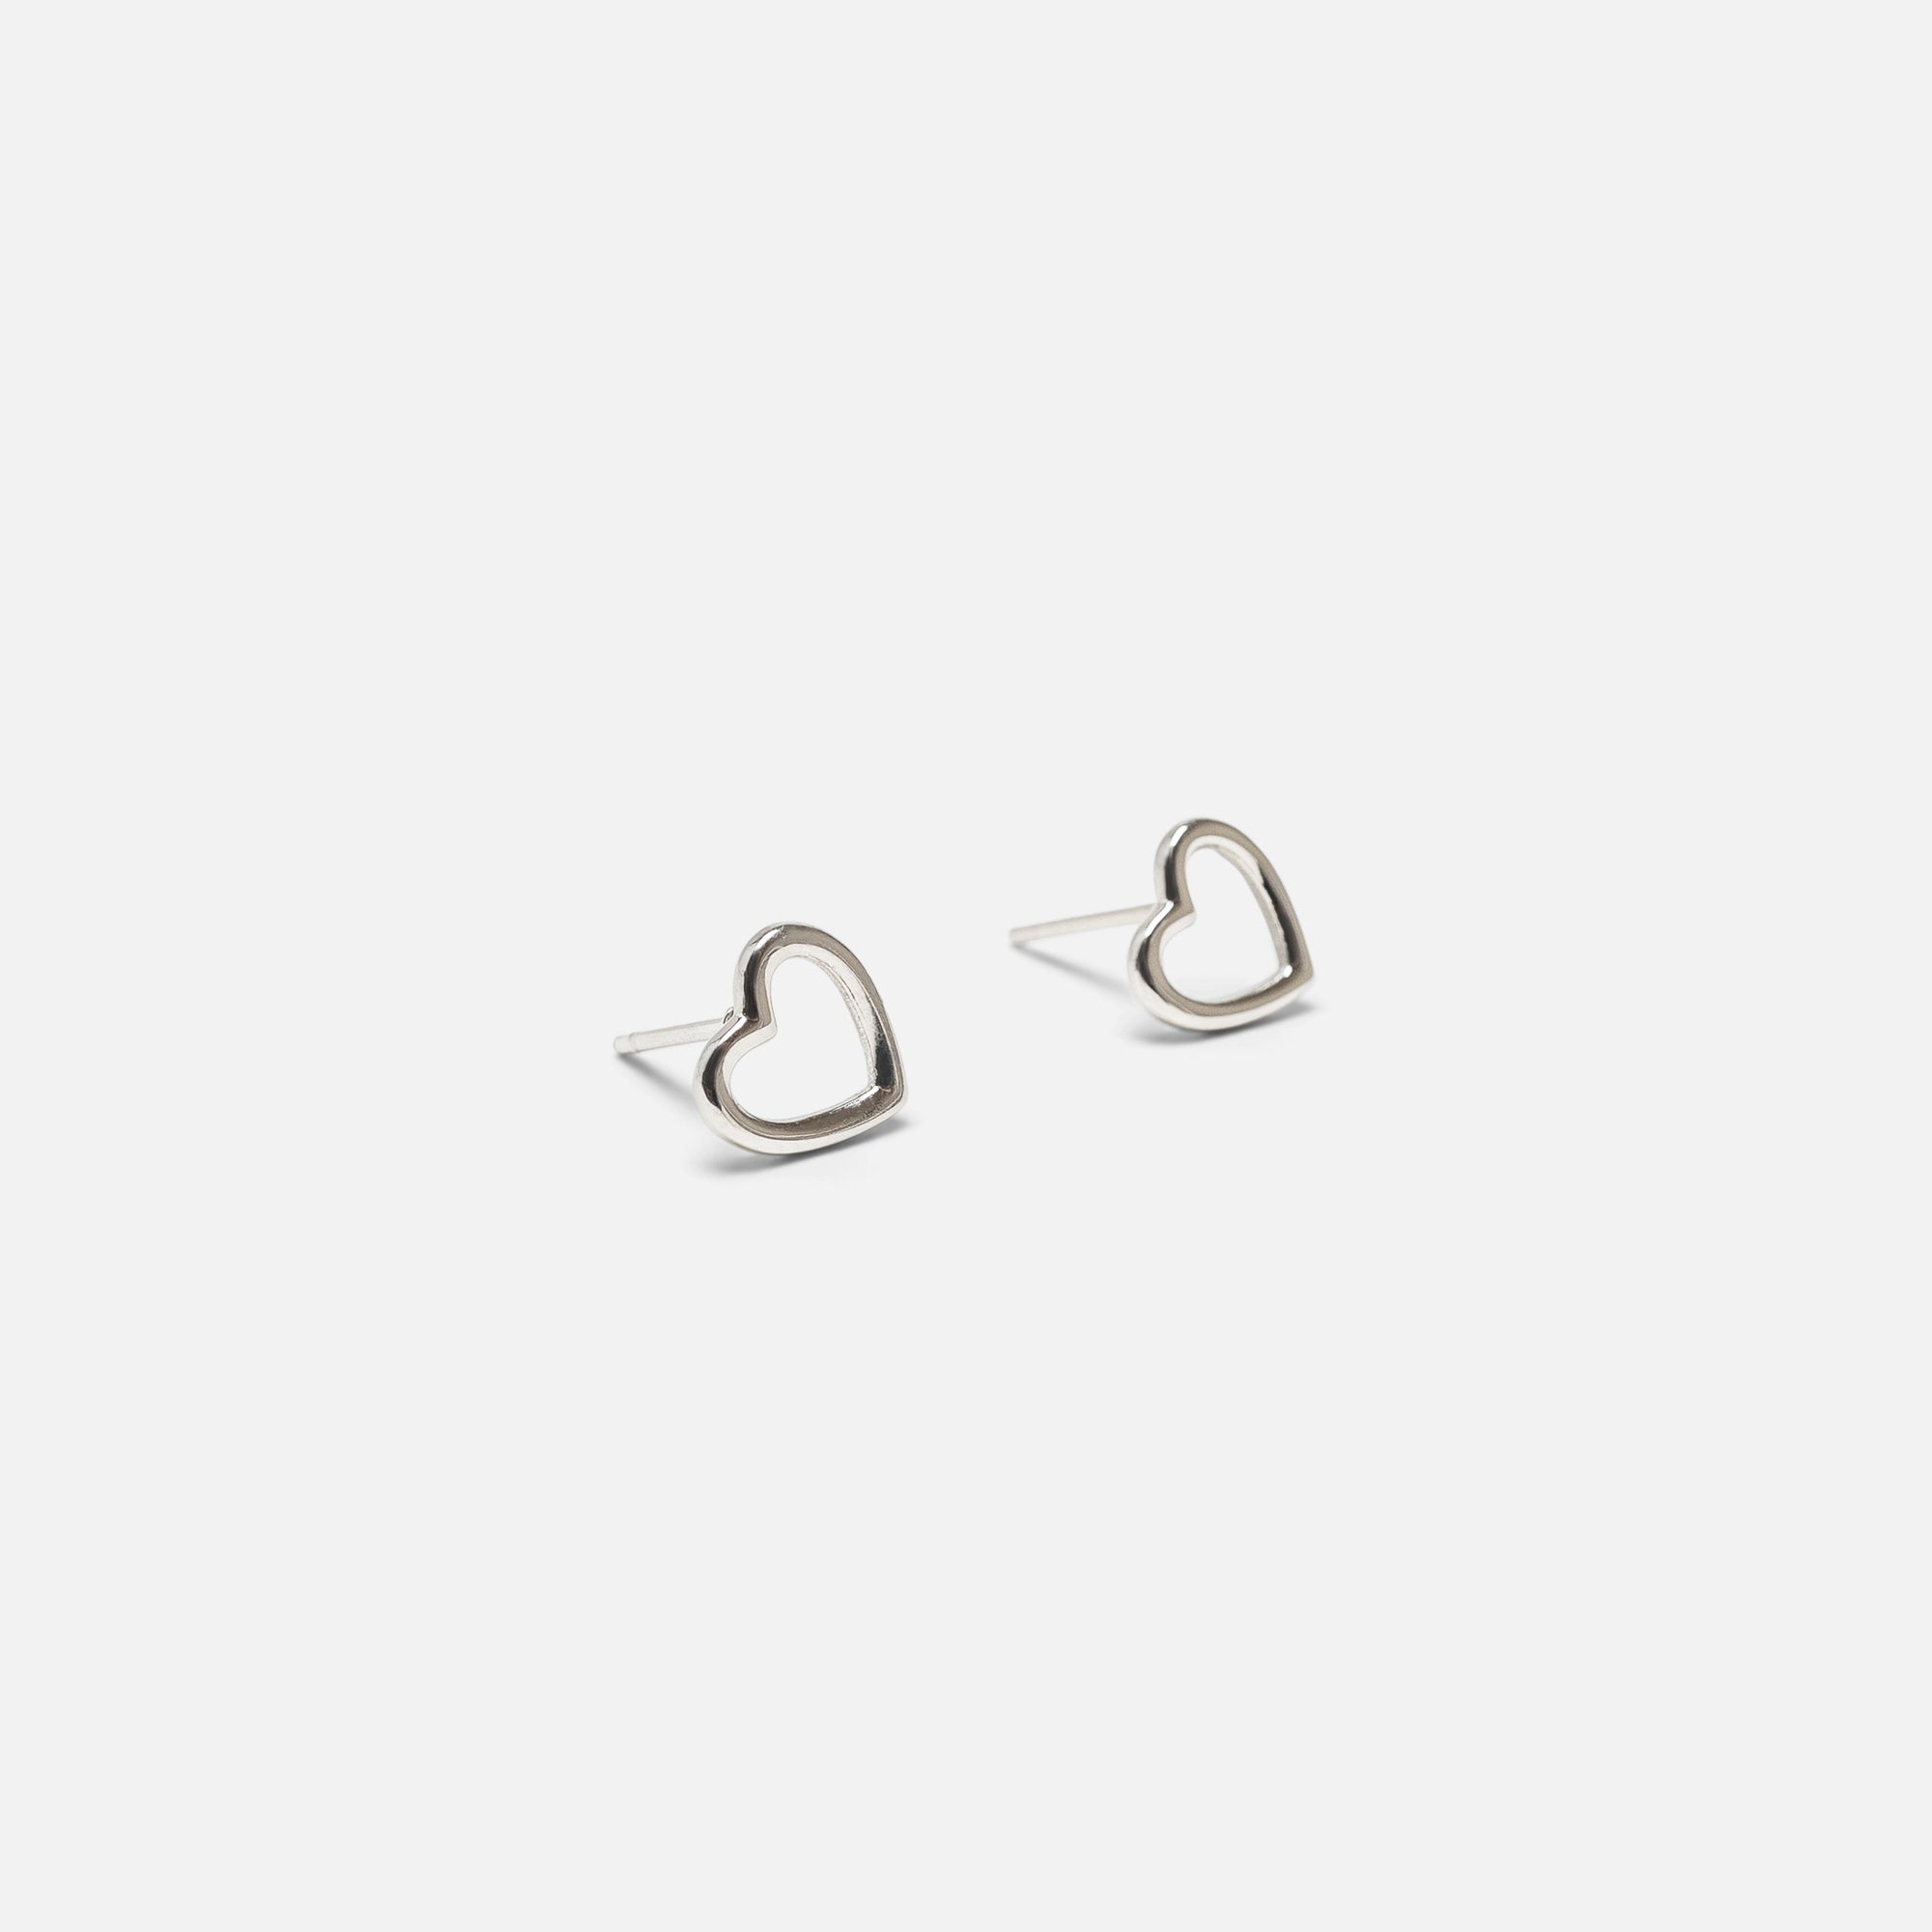 Silvered fixed earrings with stainless steel heart